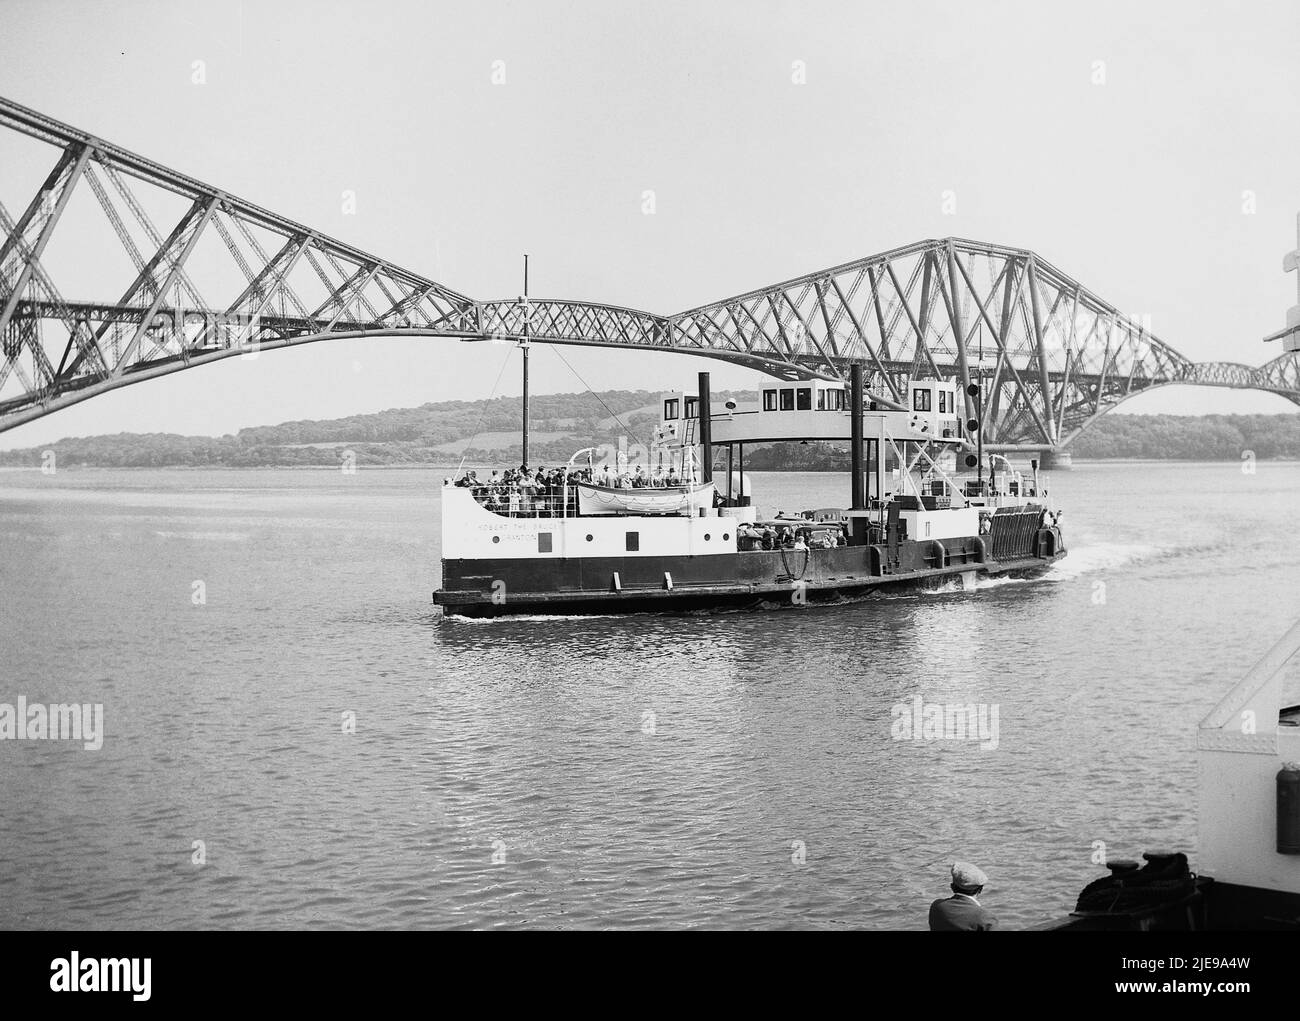 1956, historical view from this era of the Robert The Bruce ferry on the water beside the Forth Bridge, the world's first major steel structure. A cantilever railway bridge across the Firth of Forth in East of Scotland, near Edinburgh, its opening in 1890 was a major milstone in modern railway civil engineering and is the world's longest cantilever bridge. The ferry, Robert The Bruce, was built in 1934 by Clyde shipbuilders, William Denny, and could carry 500 passengers and 28 cars. It stopped operating in 1964 when the Forth Road Bridge opened. Stock Photo